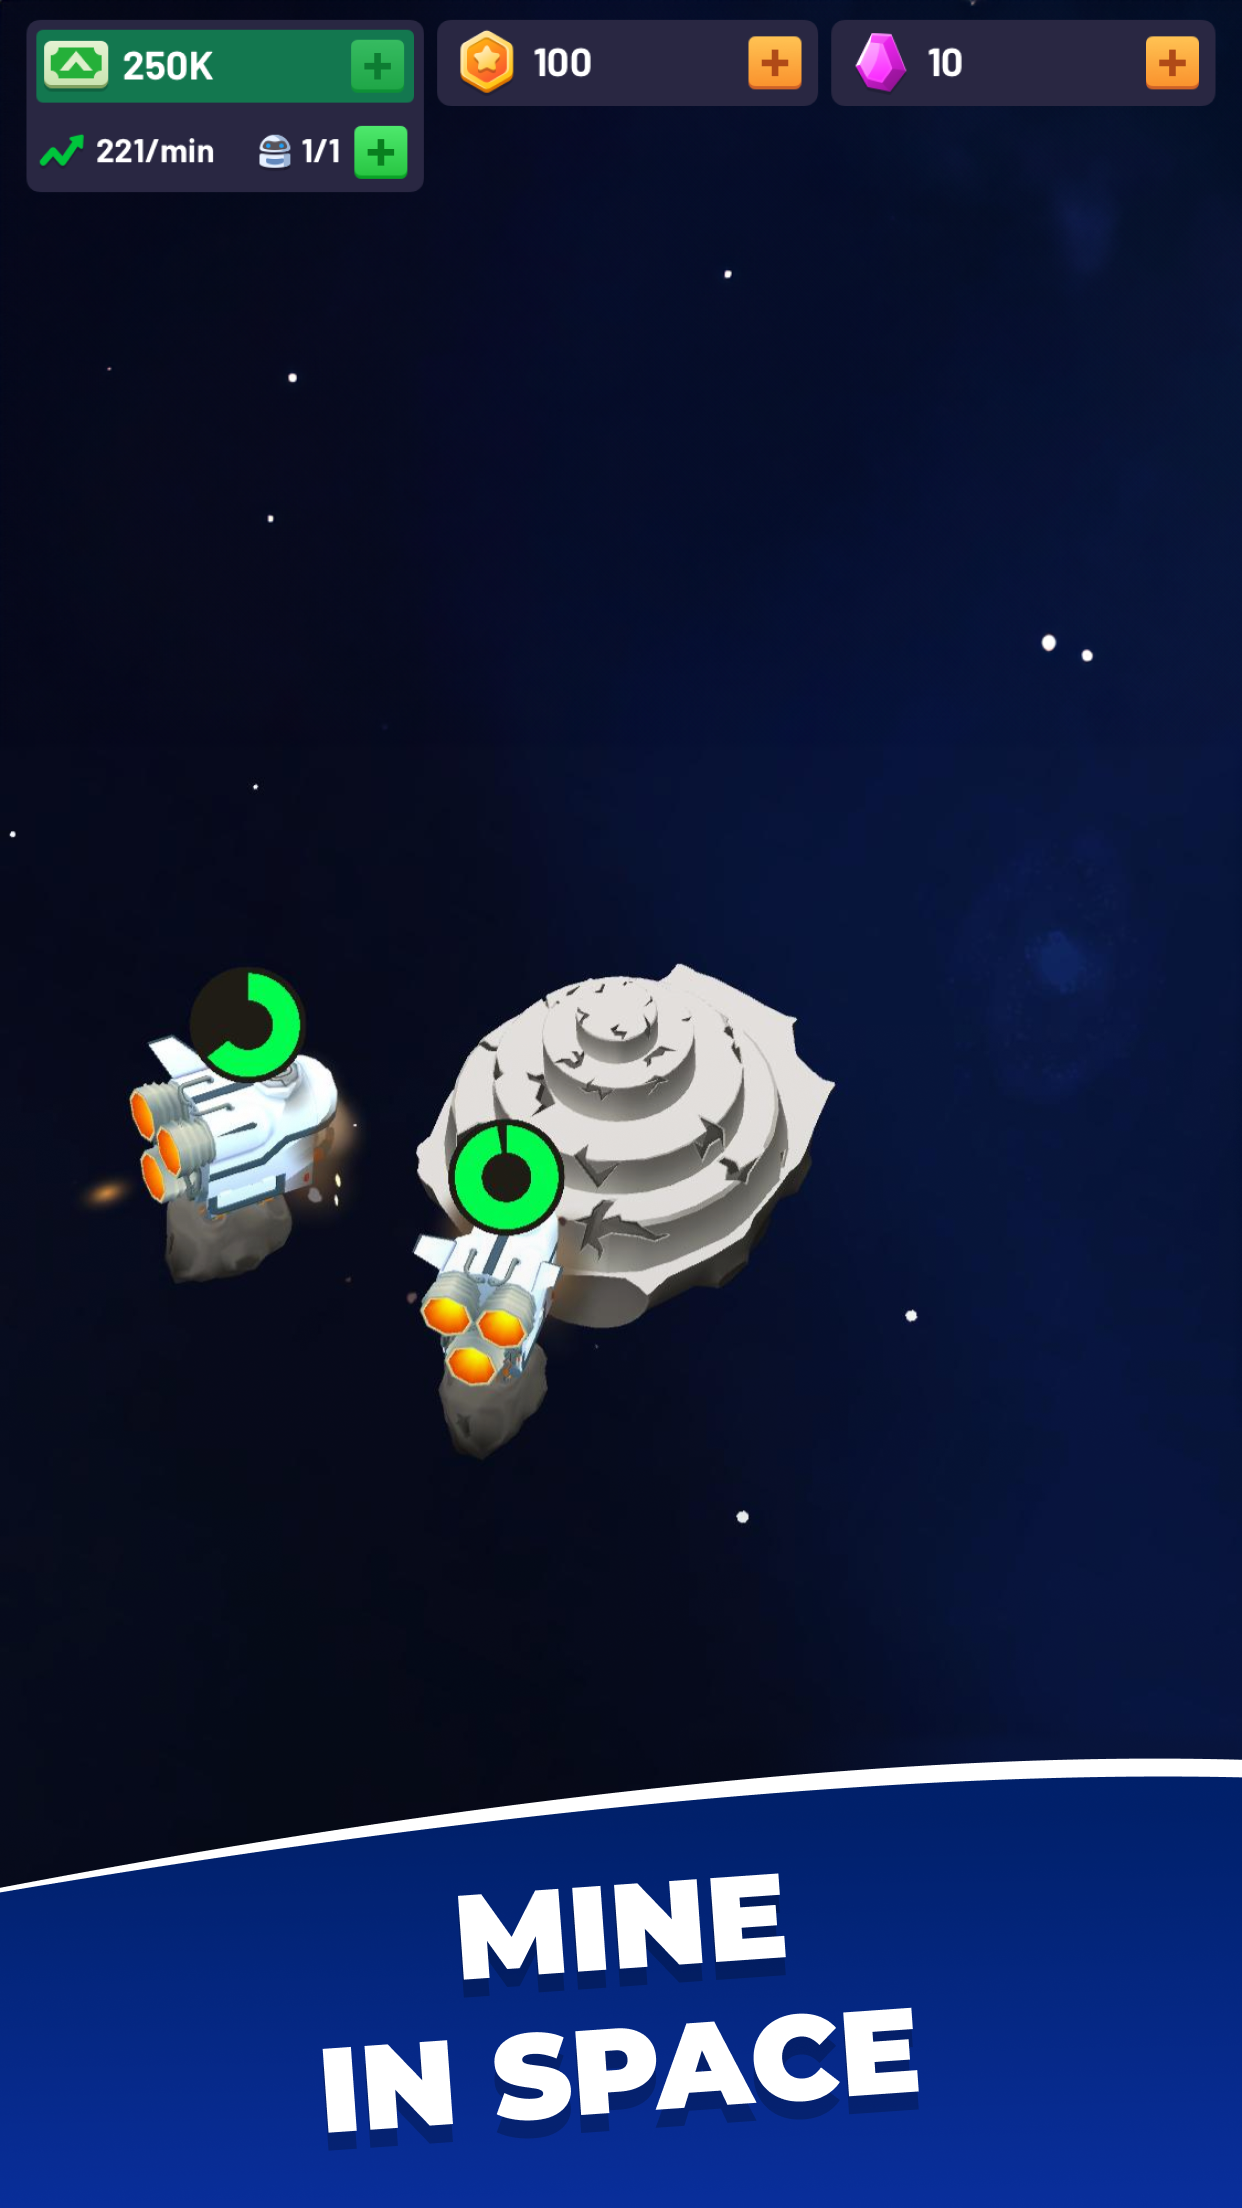 Space station tycoon. Idle Space Station Tycoon много денег и кристаллов. Idle Space Company земля. Unnamed Space Idle. Space Survivor.